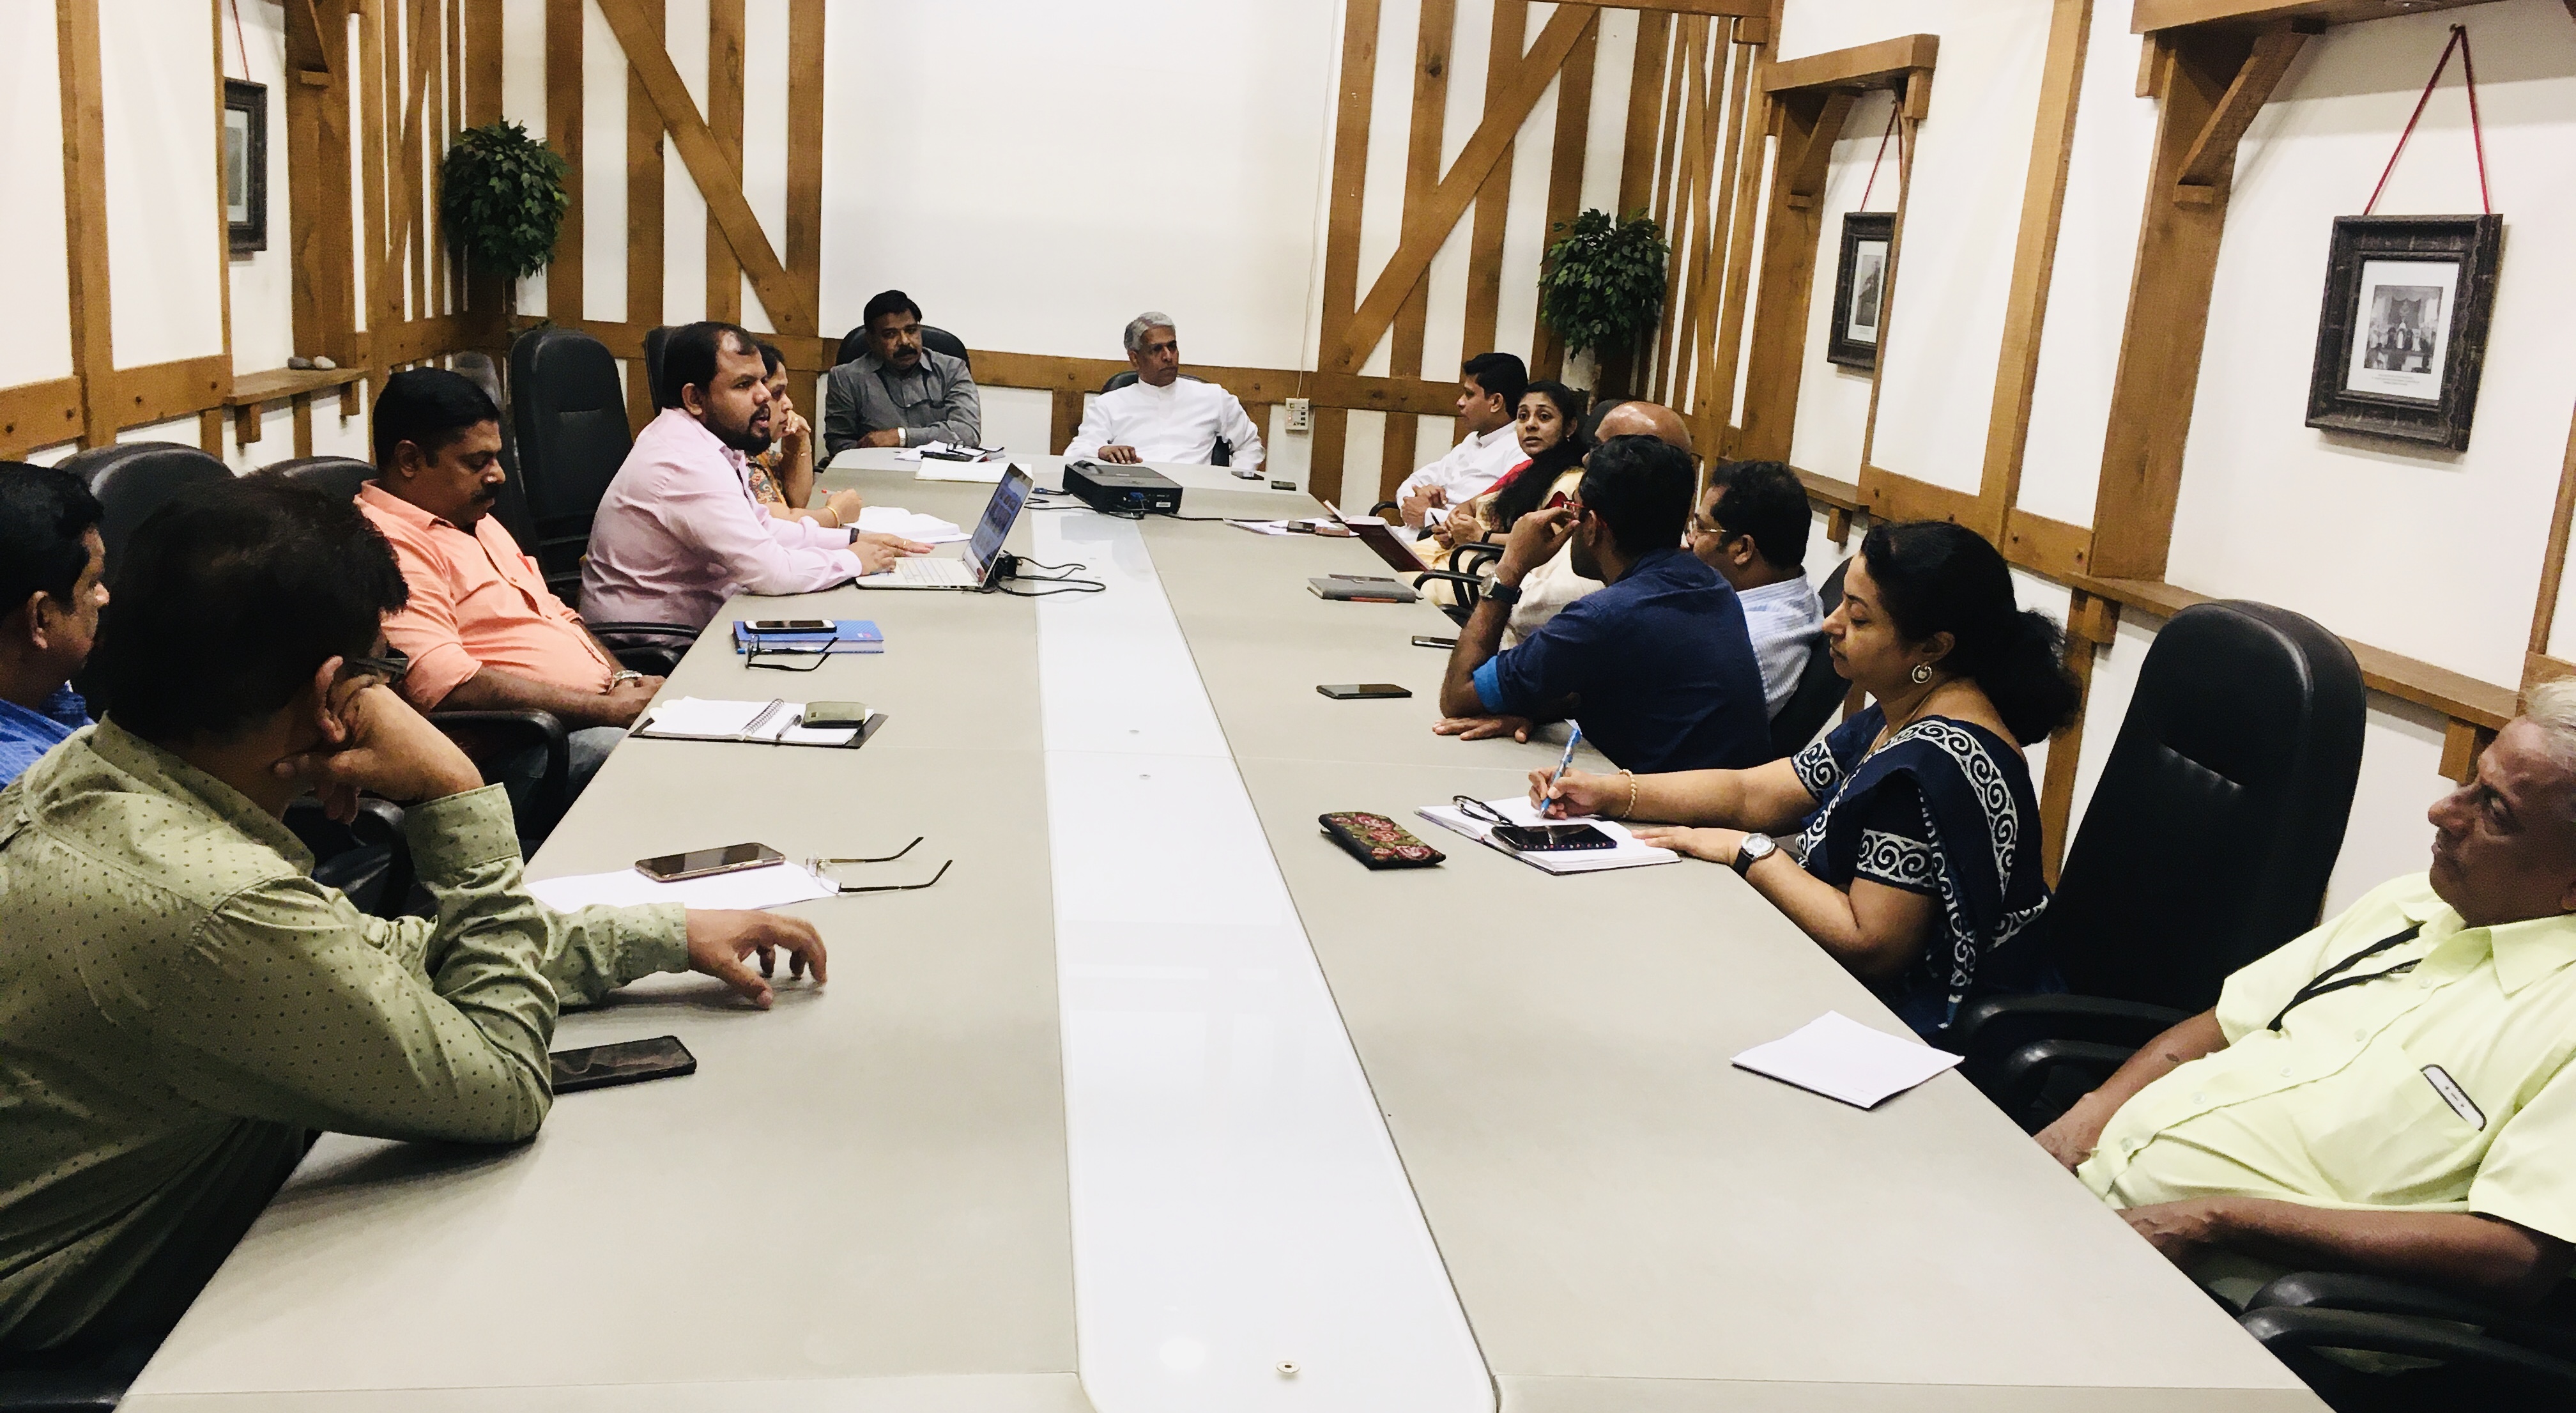 St. Albert’s College (Autonomous) Executive  Meeting  held on 09/12/2019, chaired by Chairman Rev. Fr. Antony Arackal.